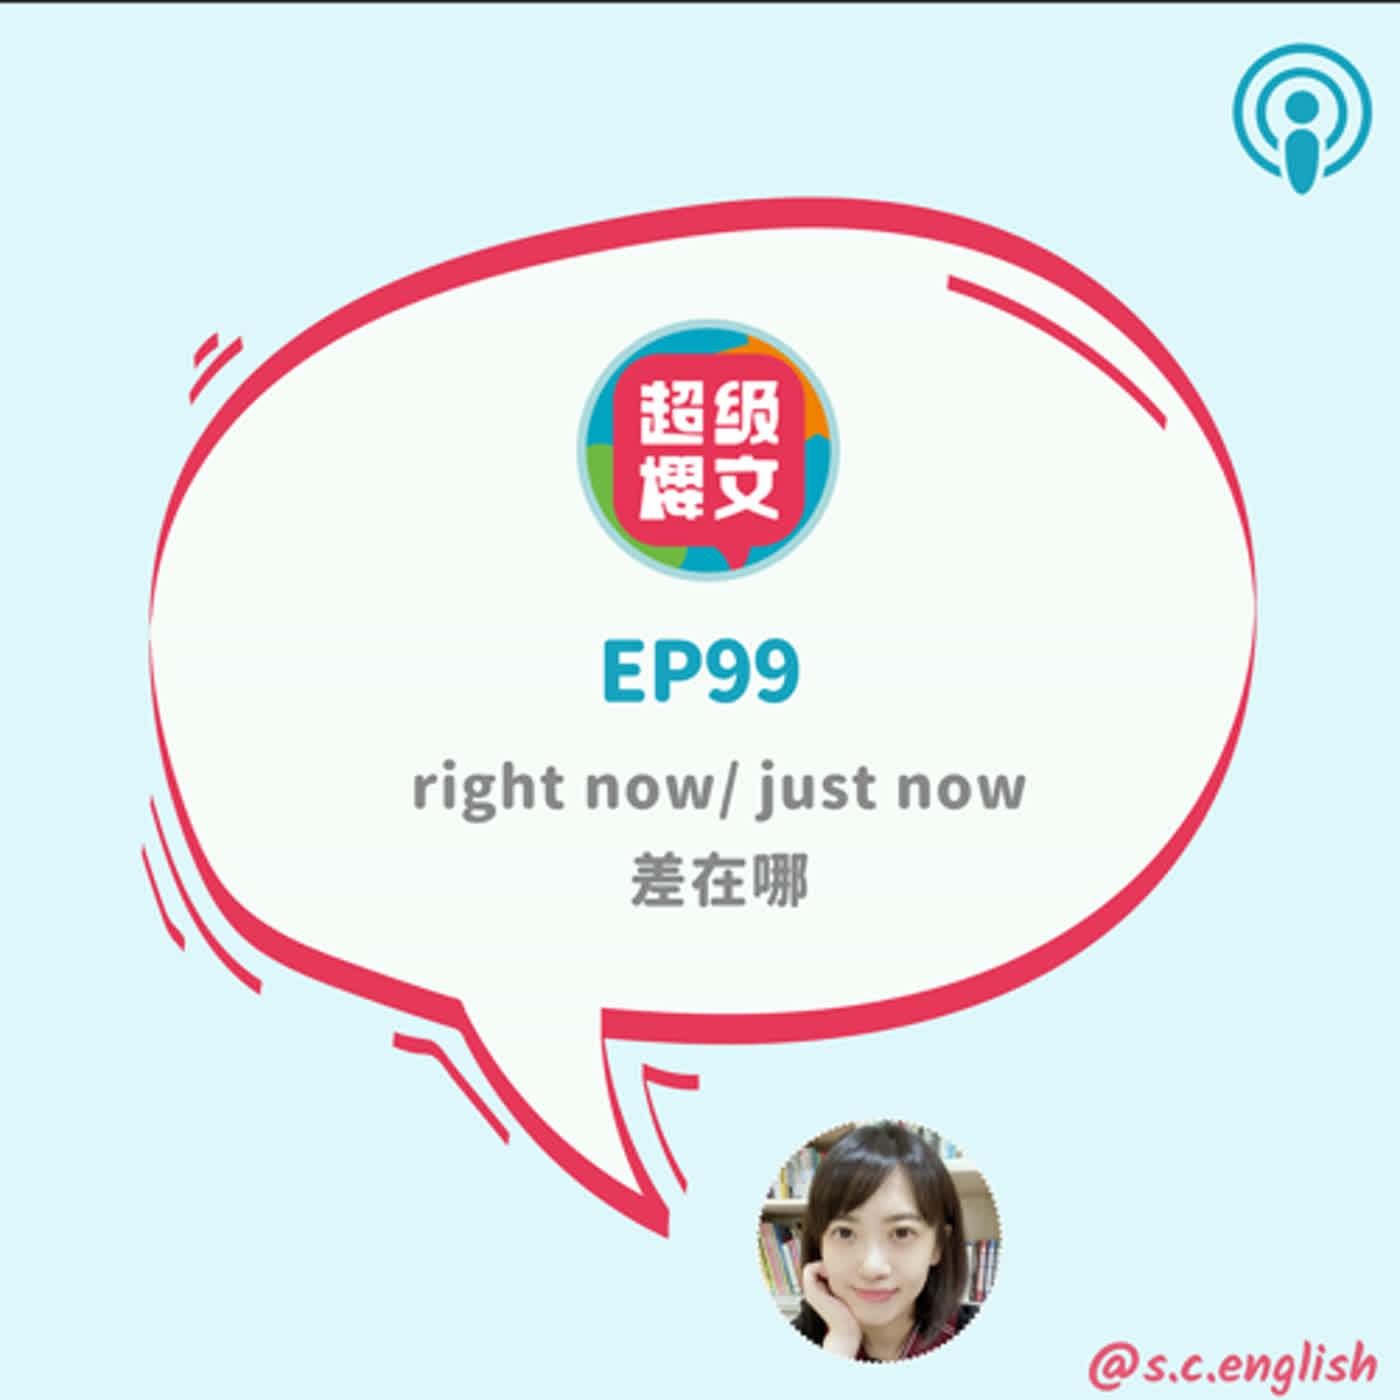 EP99｜right now/ just now 差在哪？